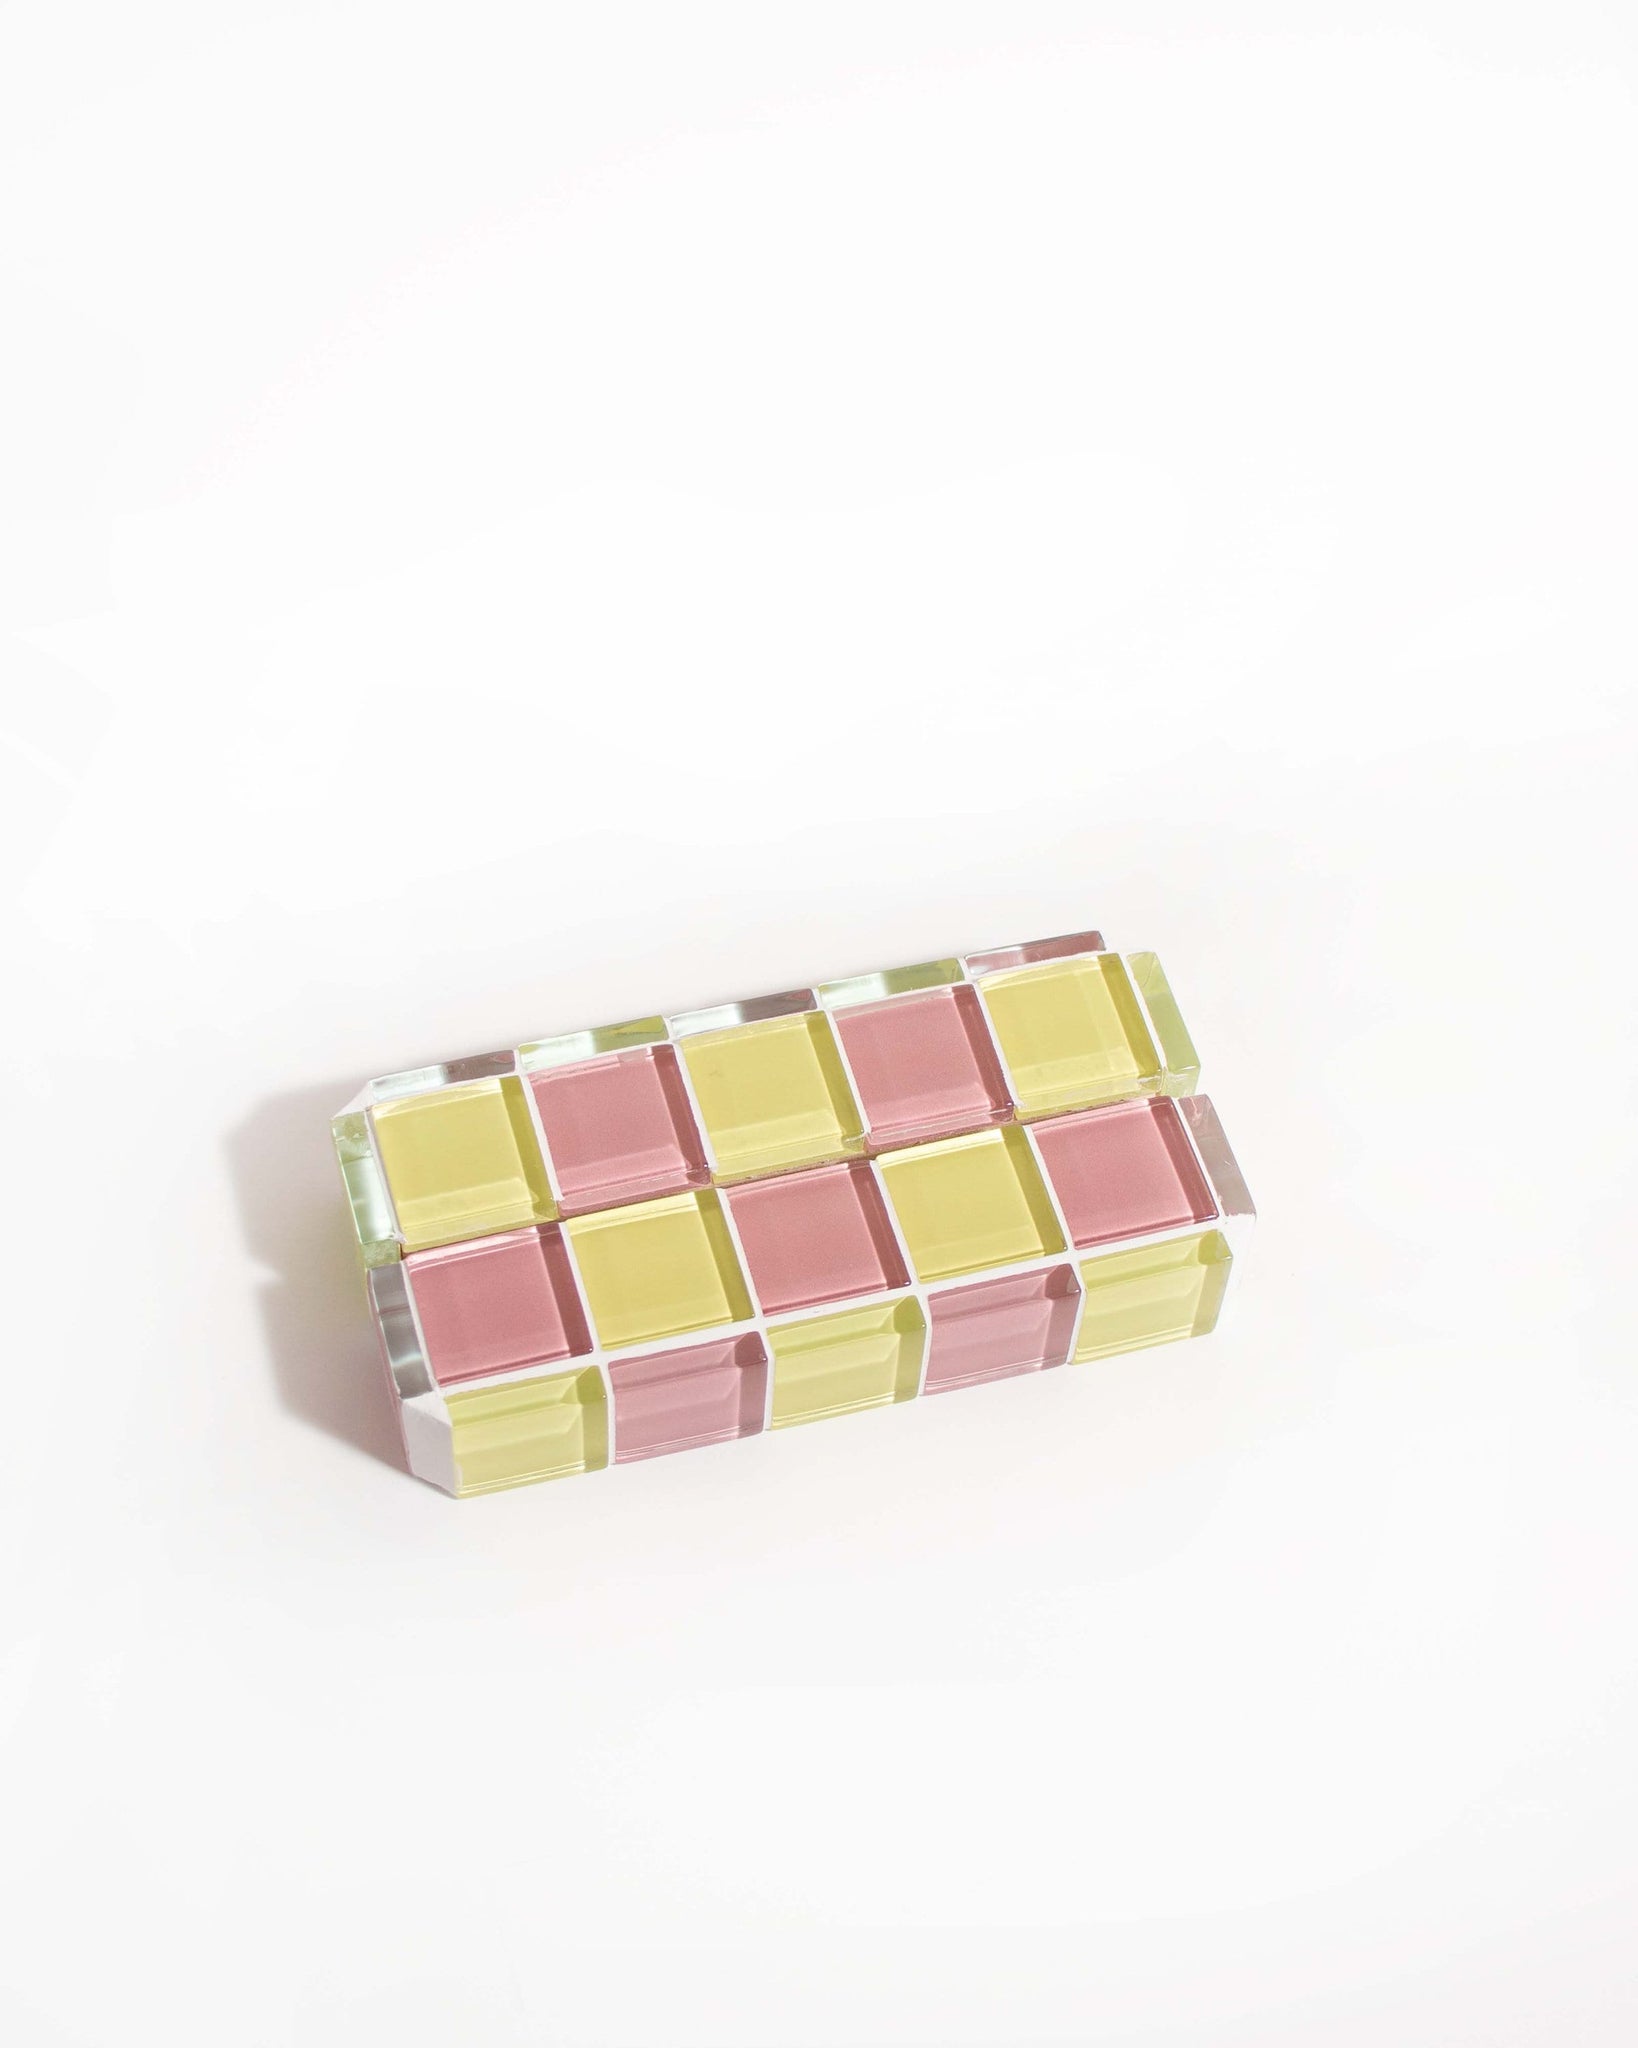 Checkered Tile Photo Stand | Picture Stand | Card Holder | Menu Stand Holder | Wedding, Modern Office Decor 2